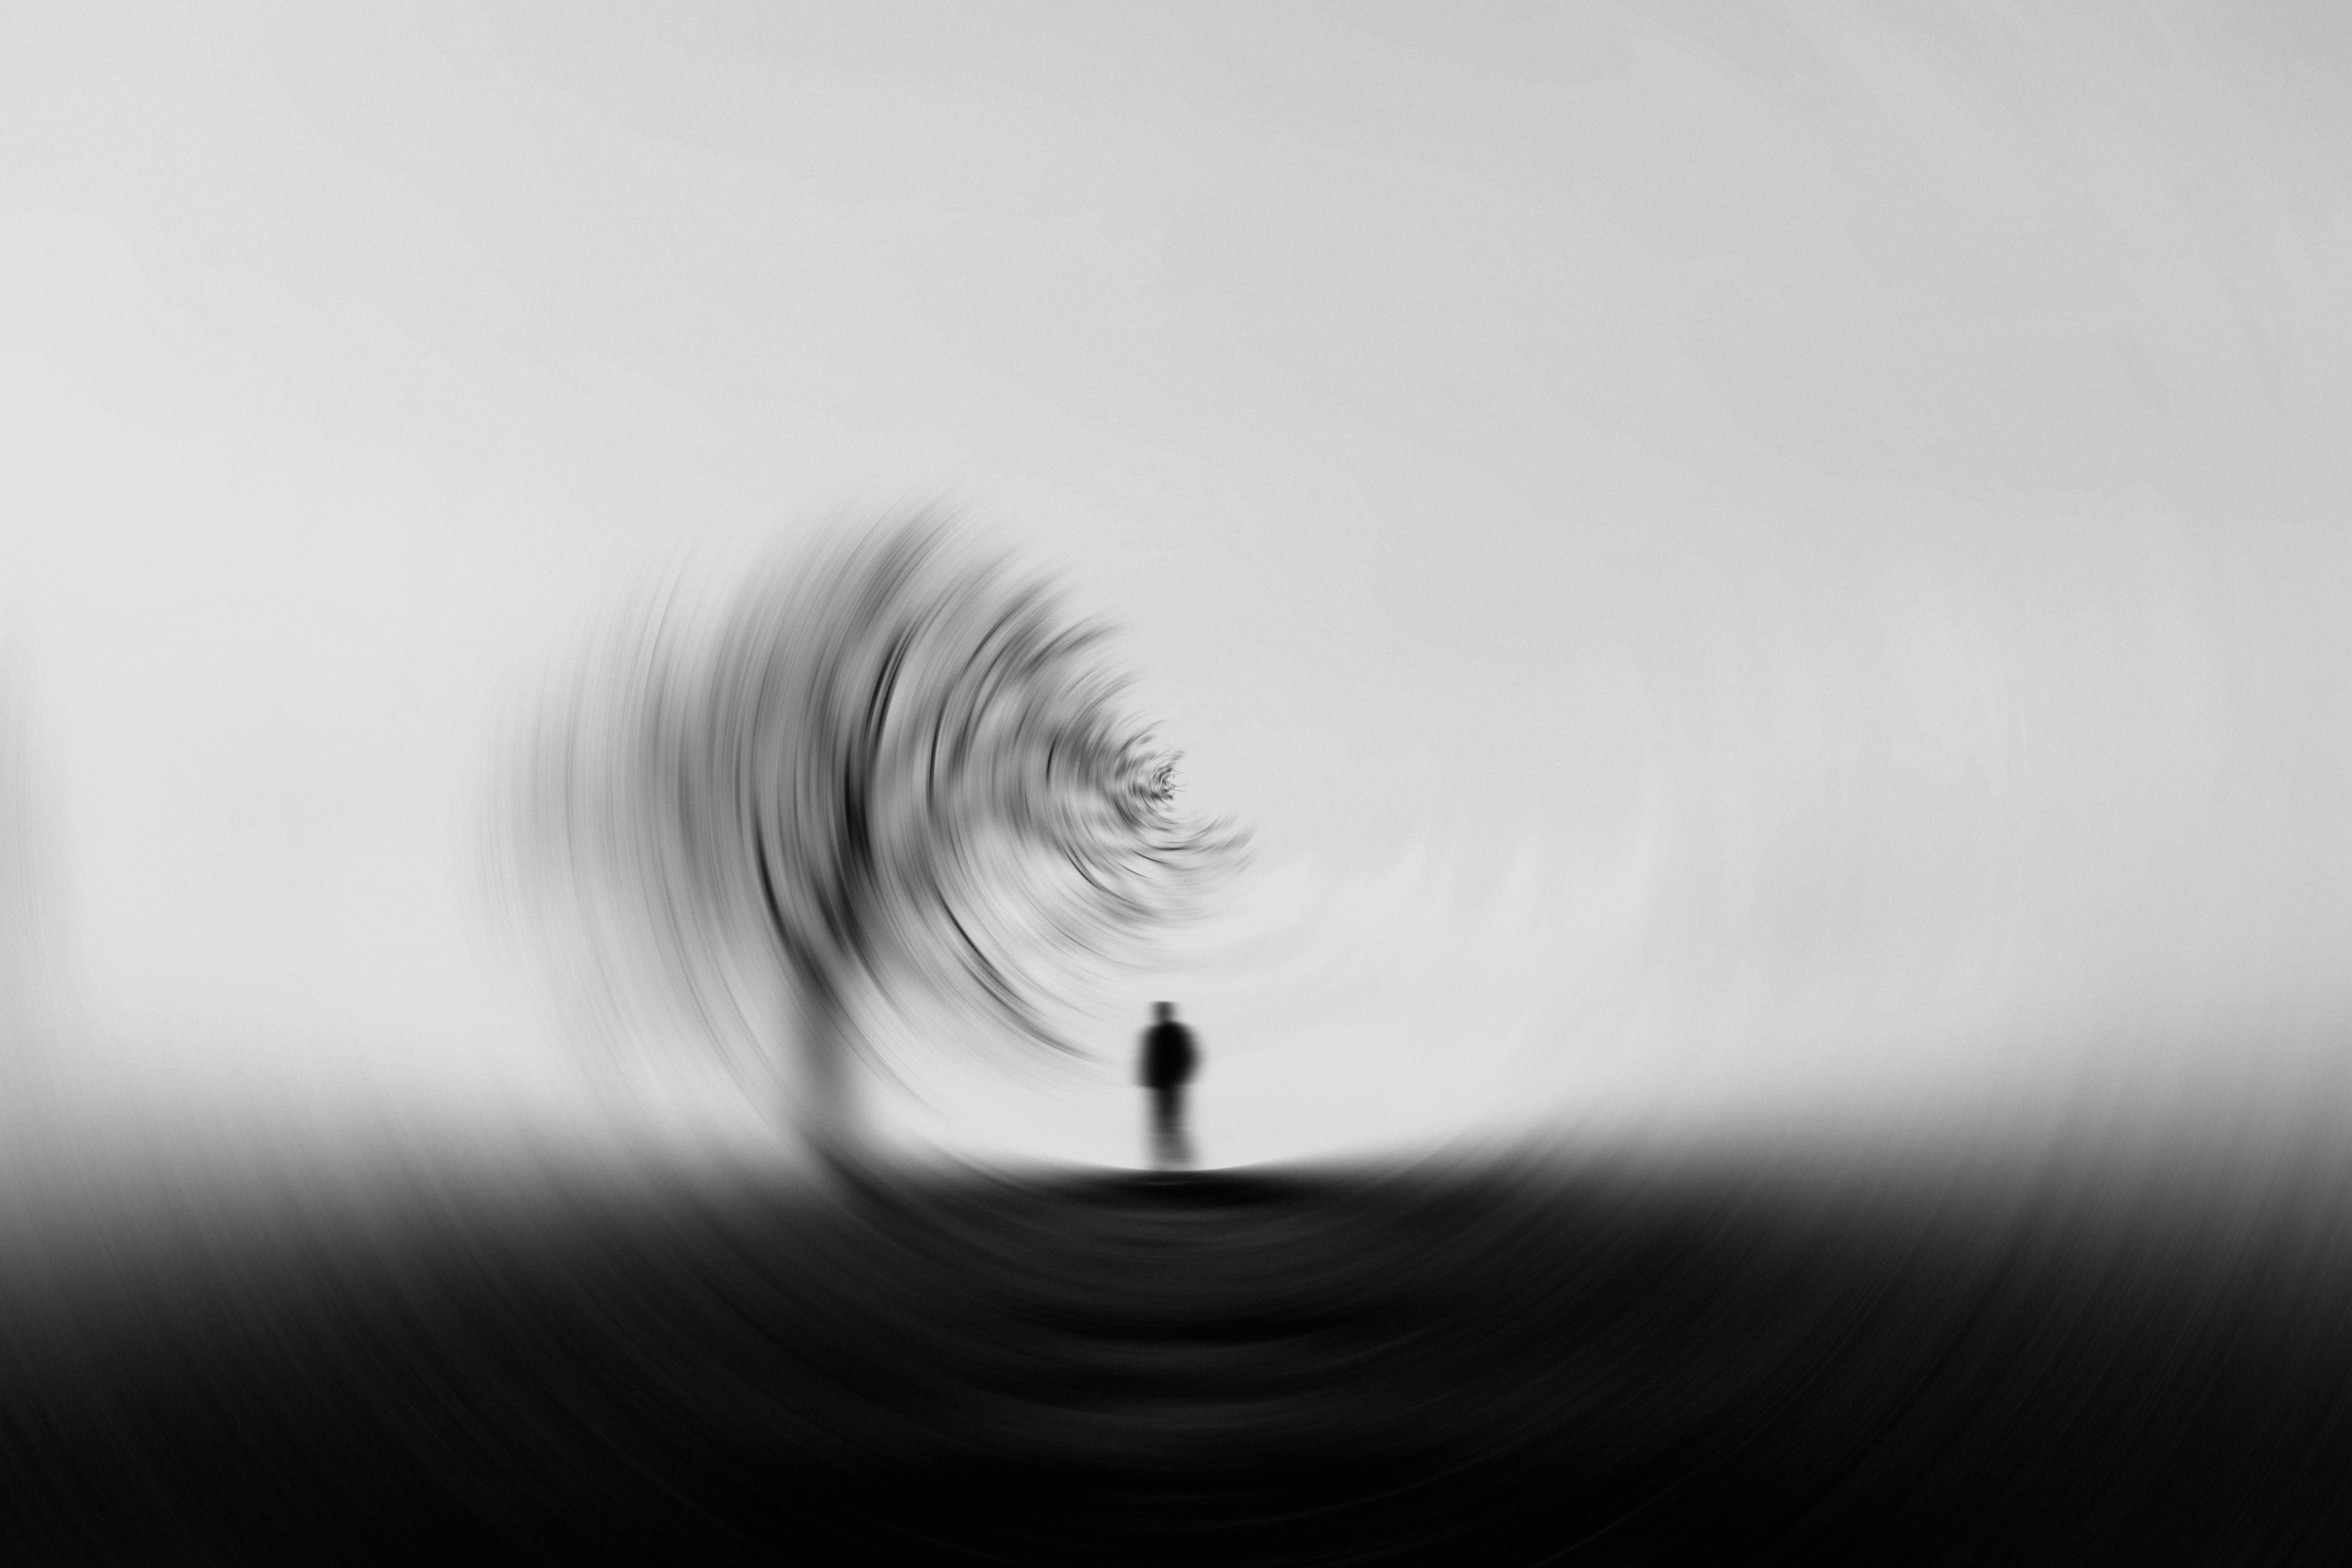 bw, chb, silhouette, smooth, blur, miscellanea, miscellaneous, wood, tree, effect